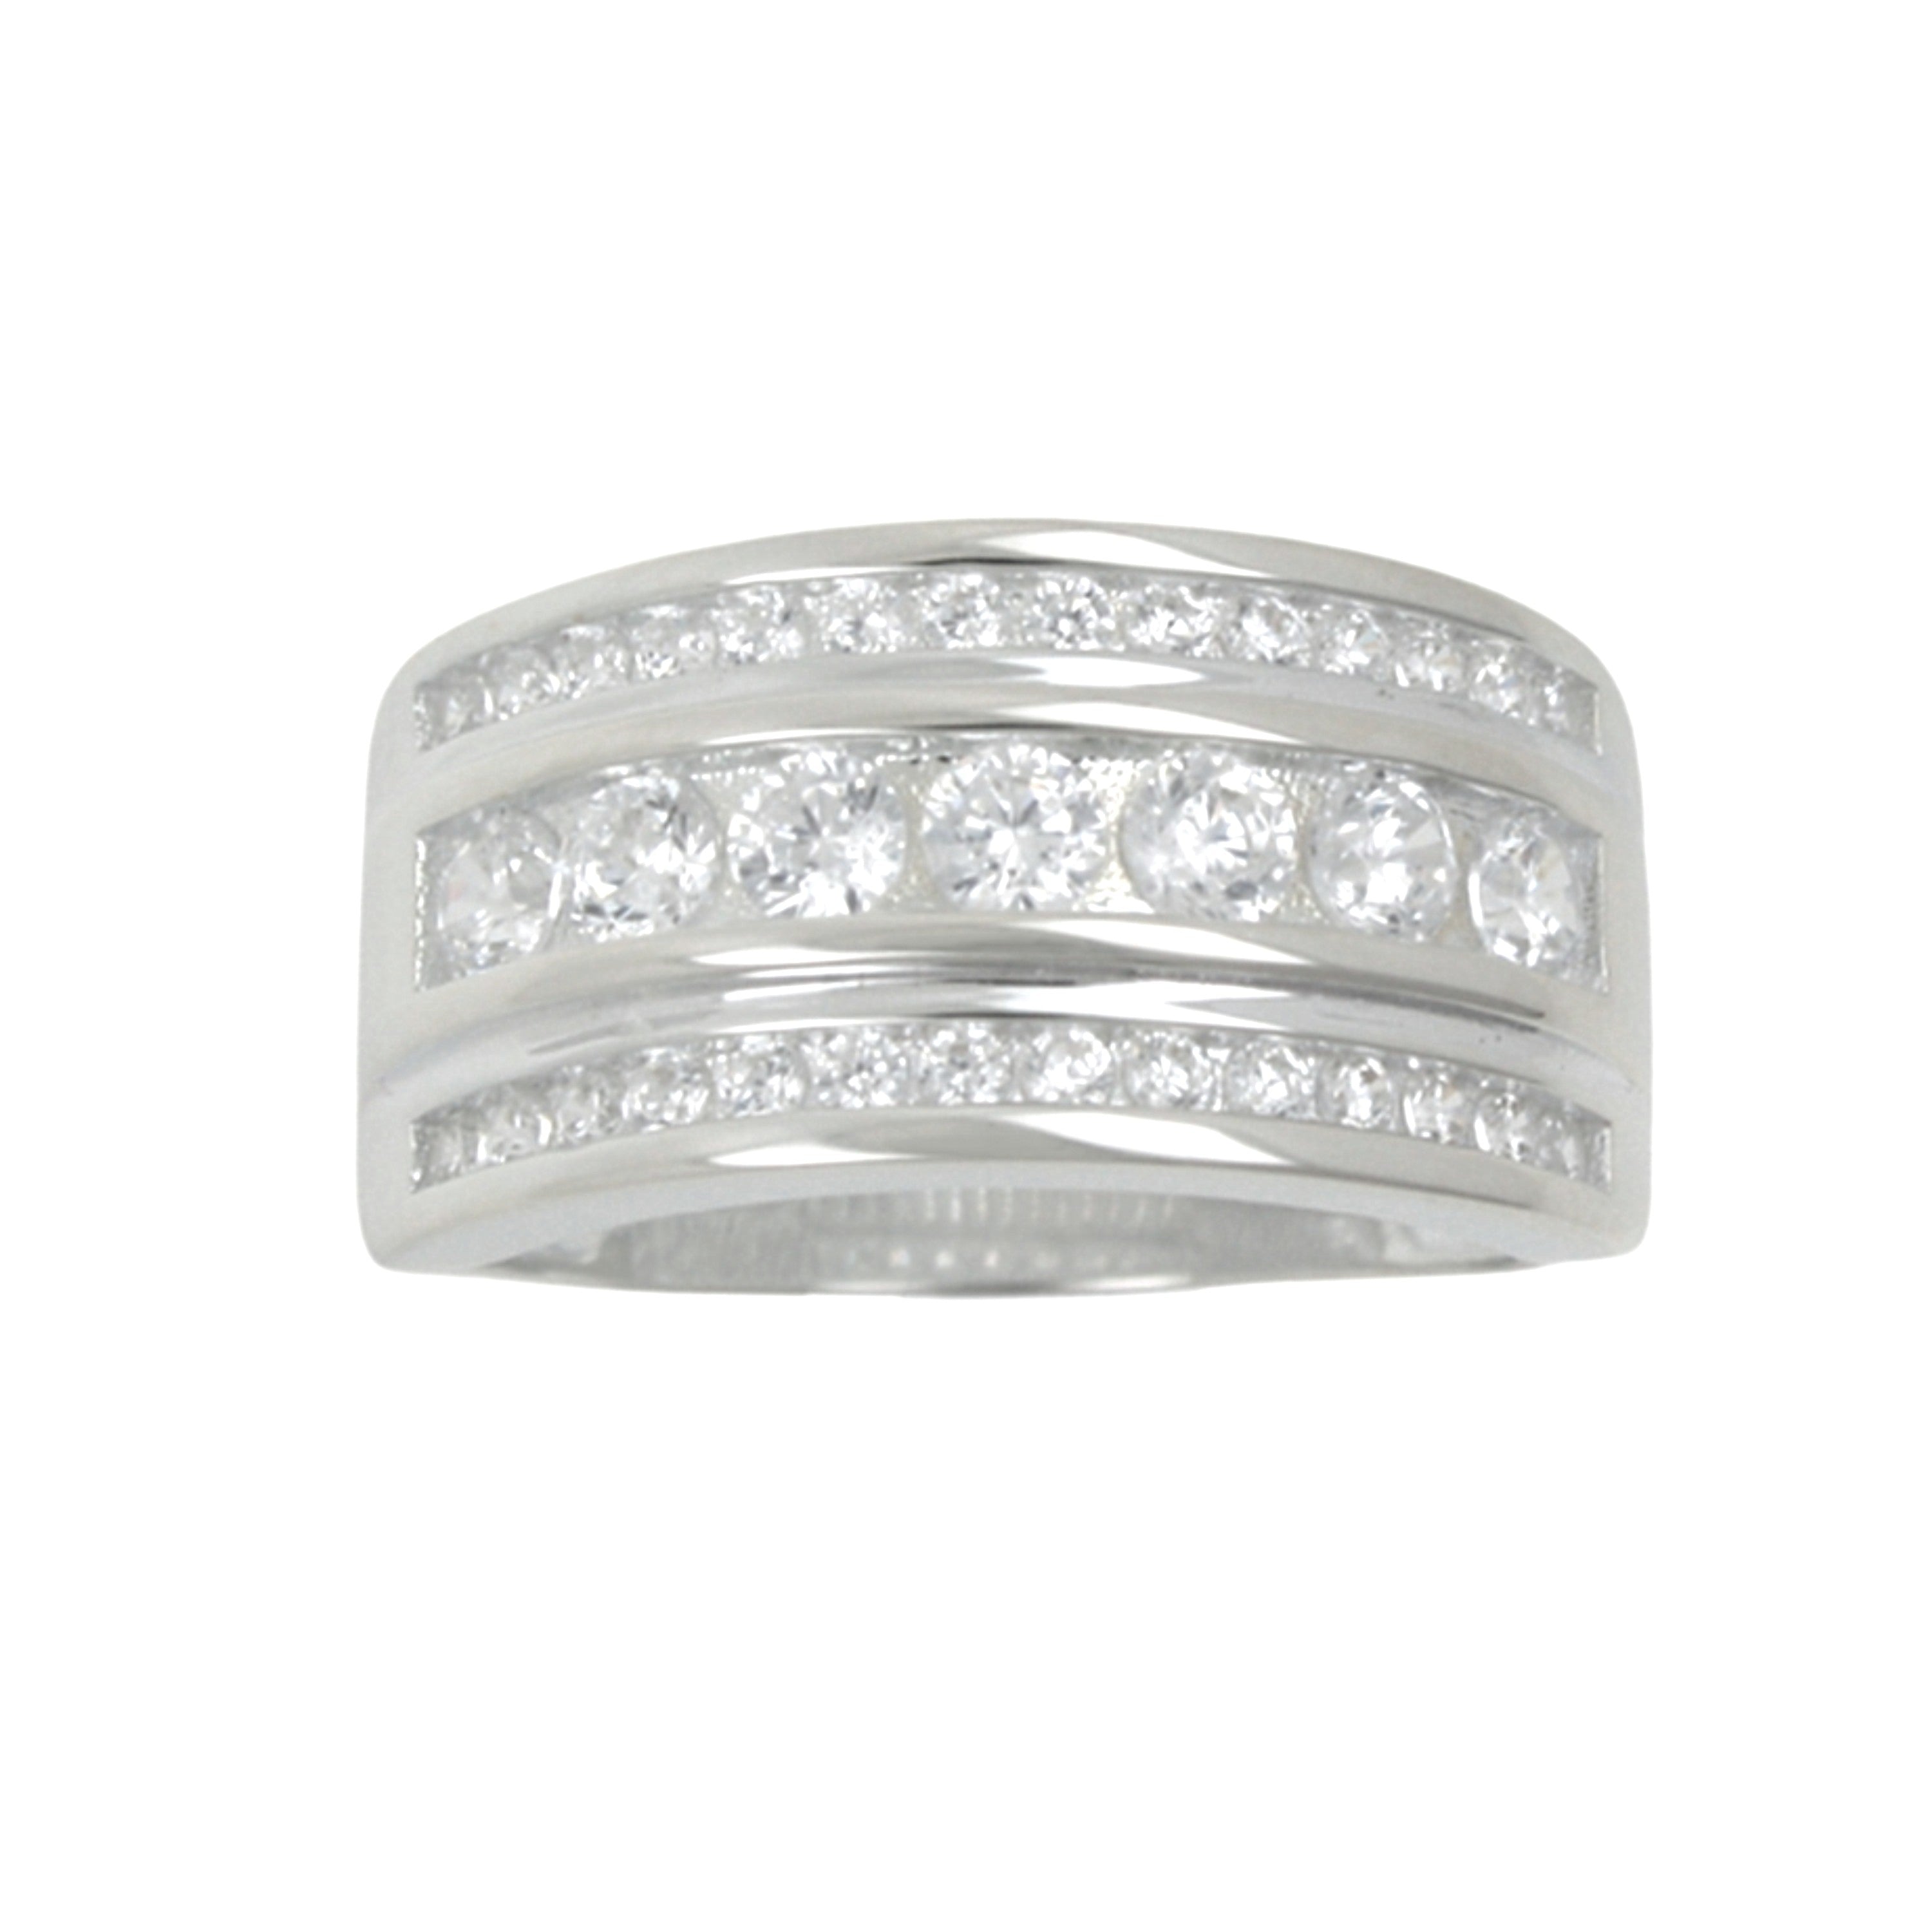 Sterling Silver 3 Row CZ Dress Ring